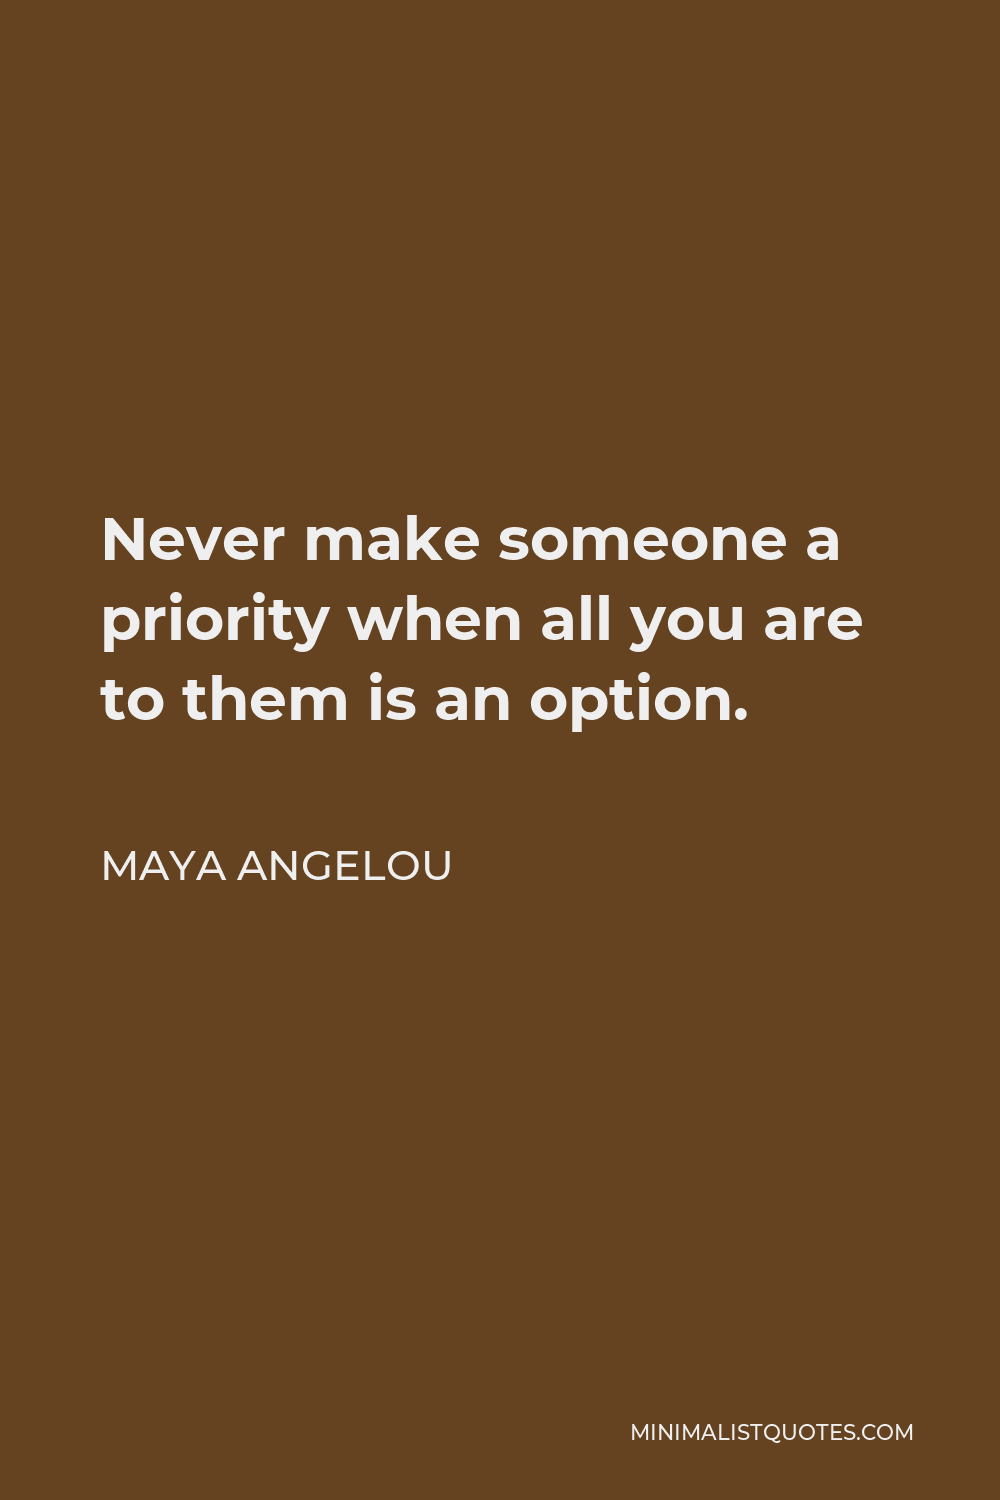 Maya Angelou Quote - Never make someone a priority when all you are to them is an option.